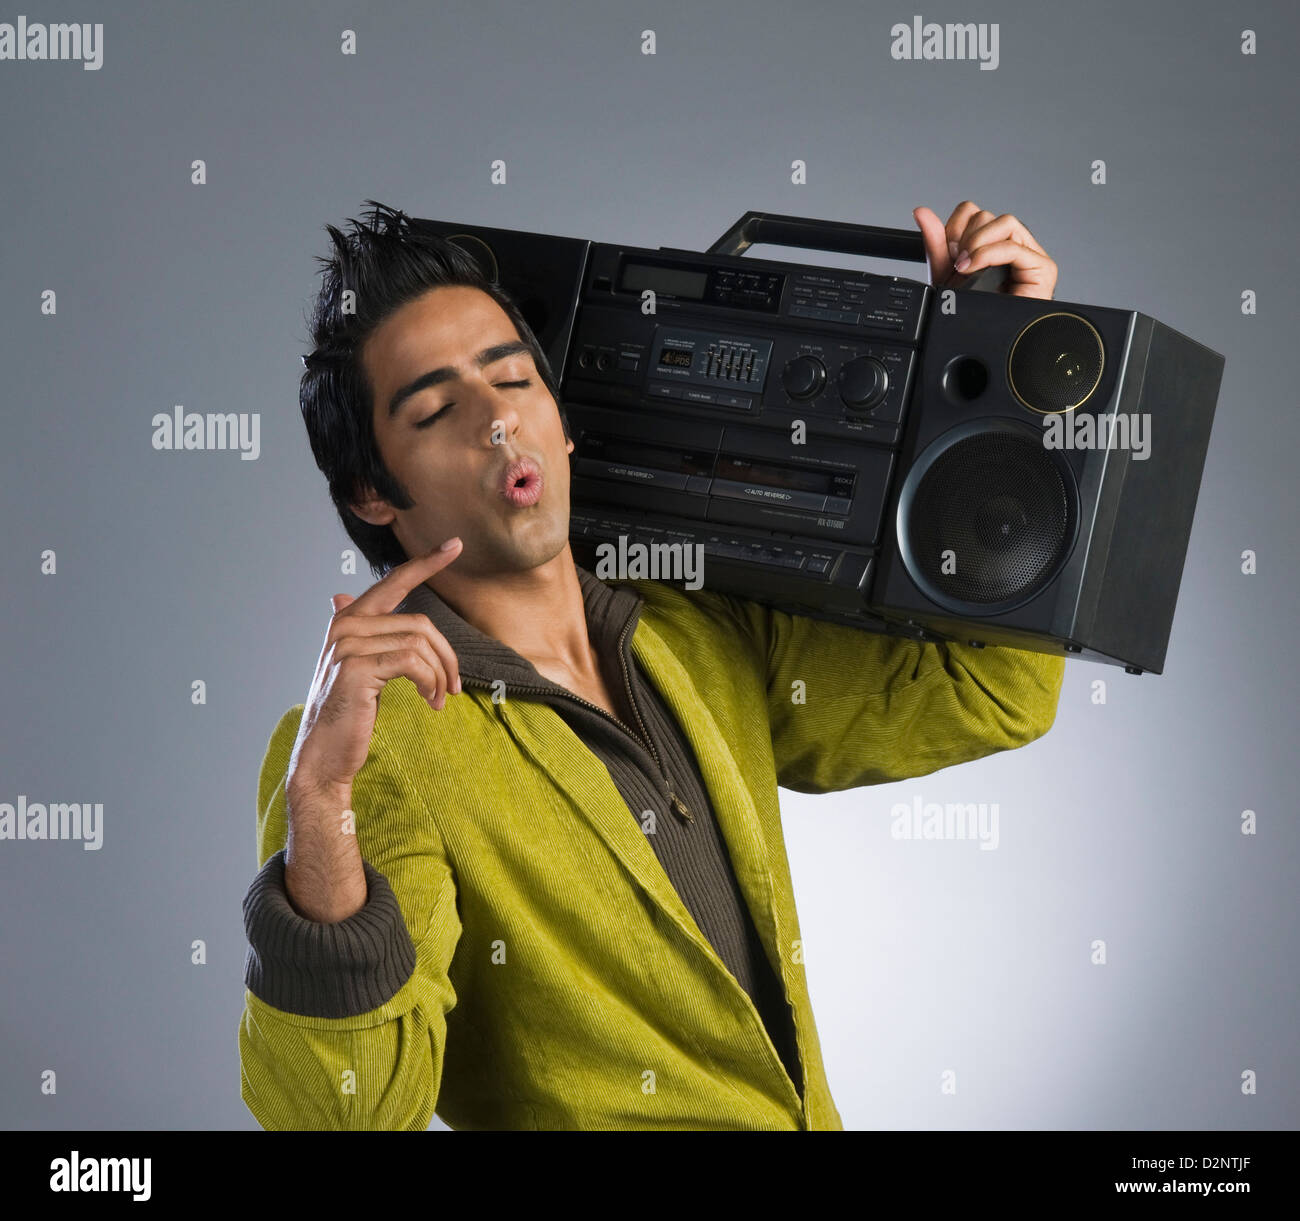 Man listening to a music system and whistling Stock Photo